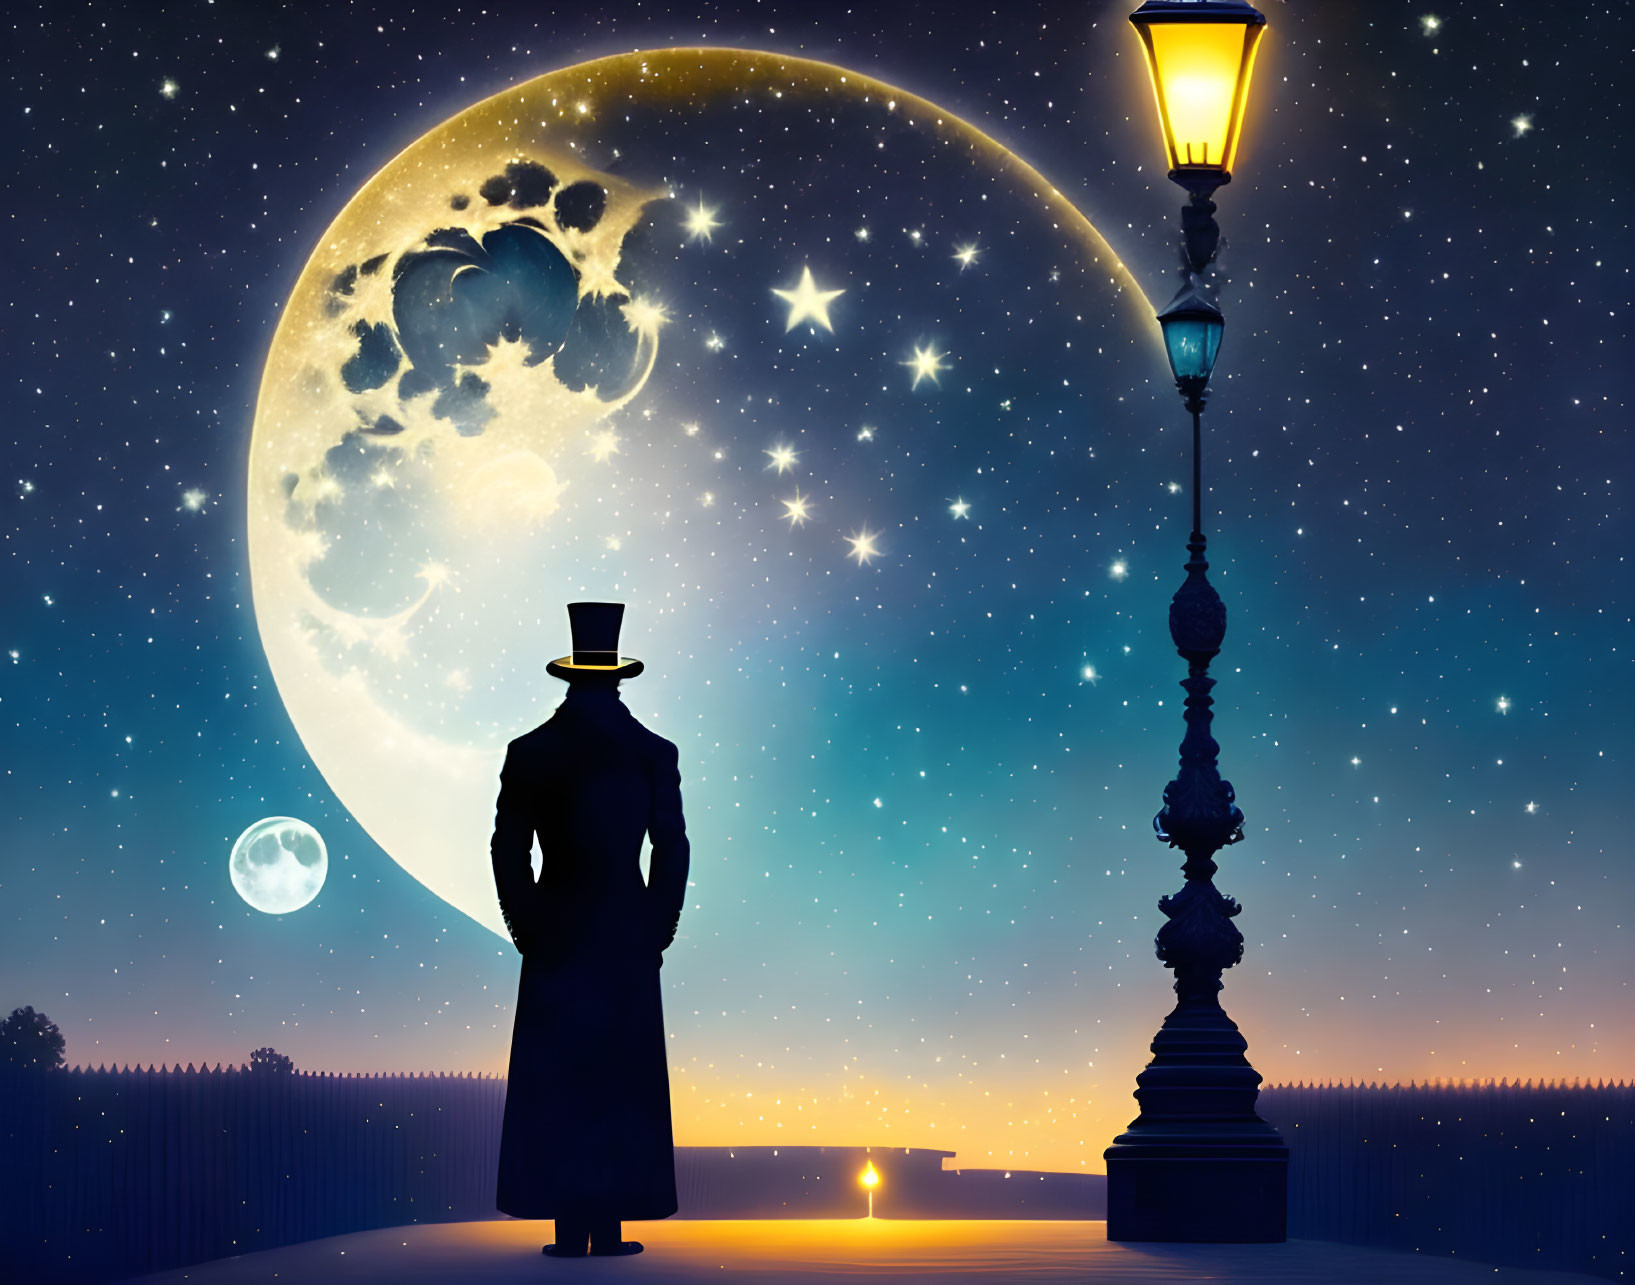 Person in Top Hat Silhouette with Crescent Moon and Stars at Twilight